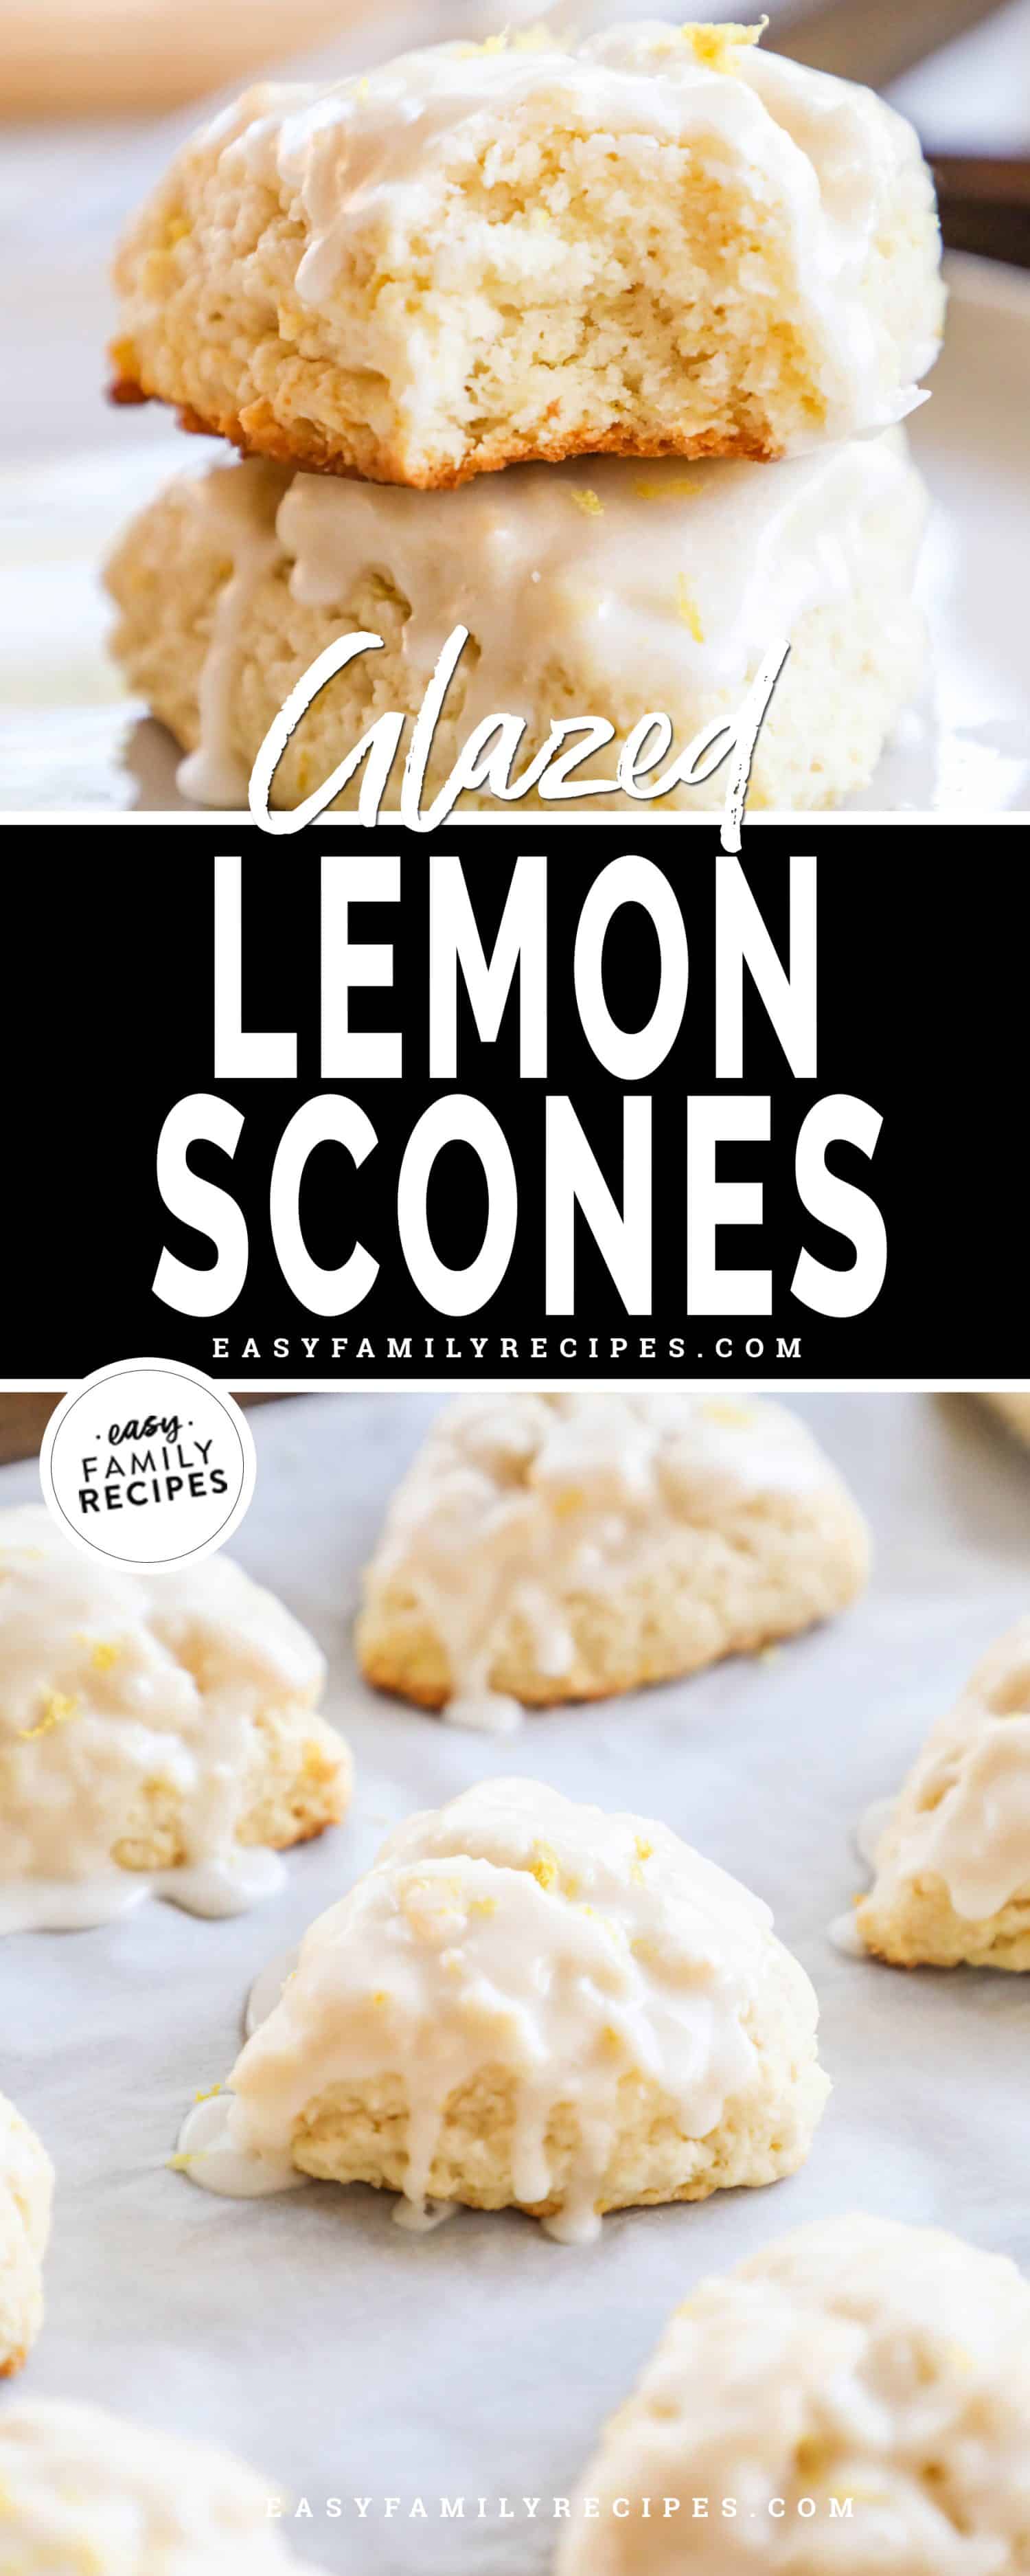 2 image collage of lemon scones, one with glazed scones stacked on top of each other with a bite taken out of the top one, and the other showing the scones on parchment paper dripping with glaze.